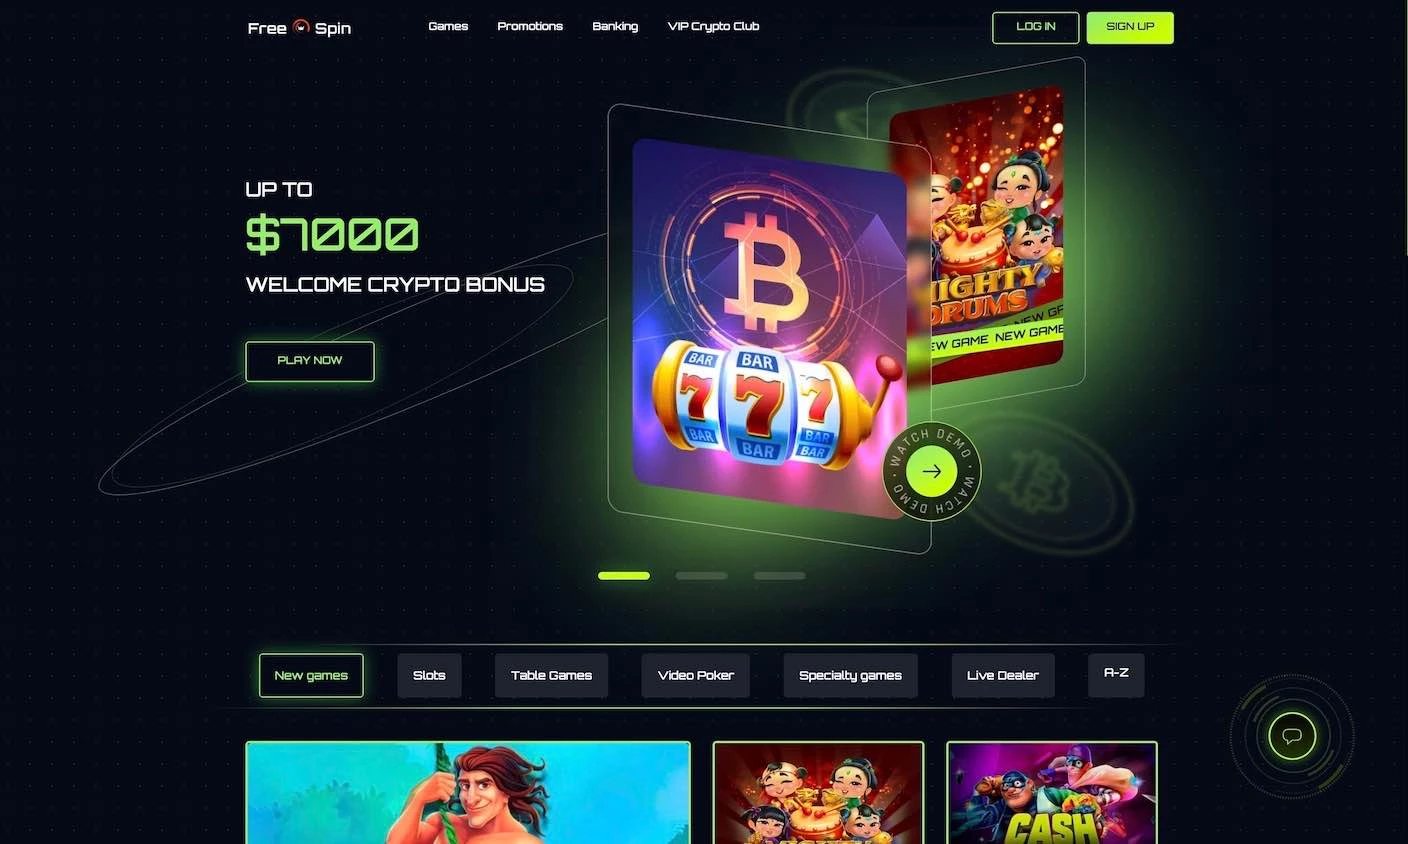 Free spin casino main page